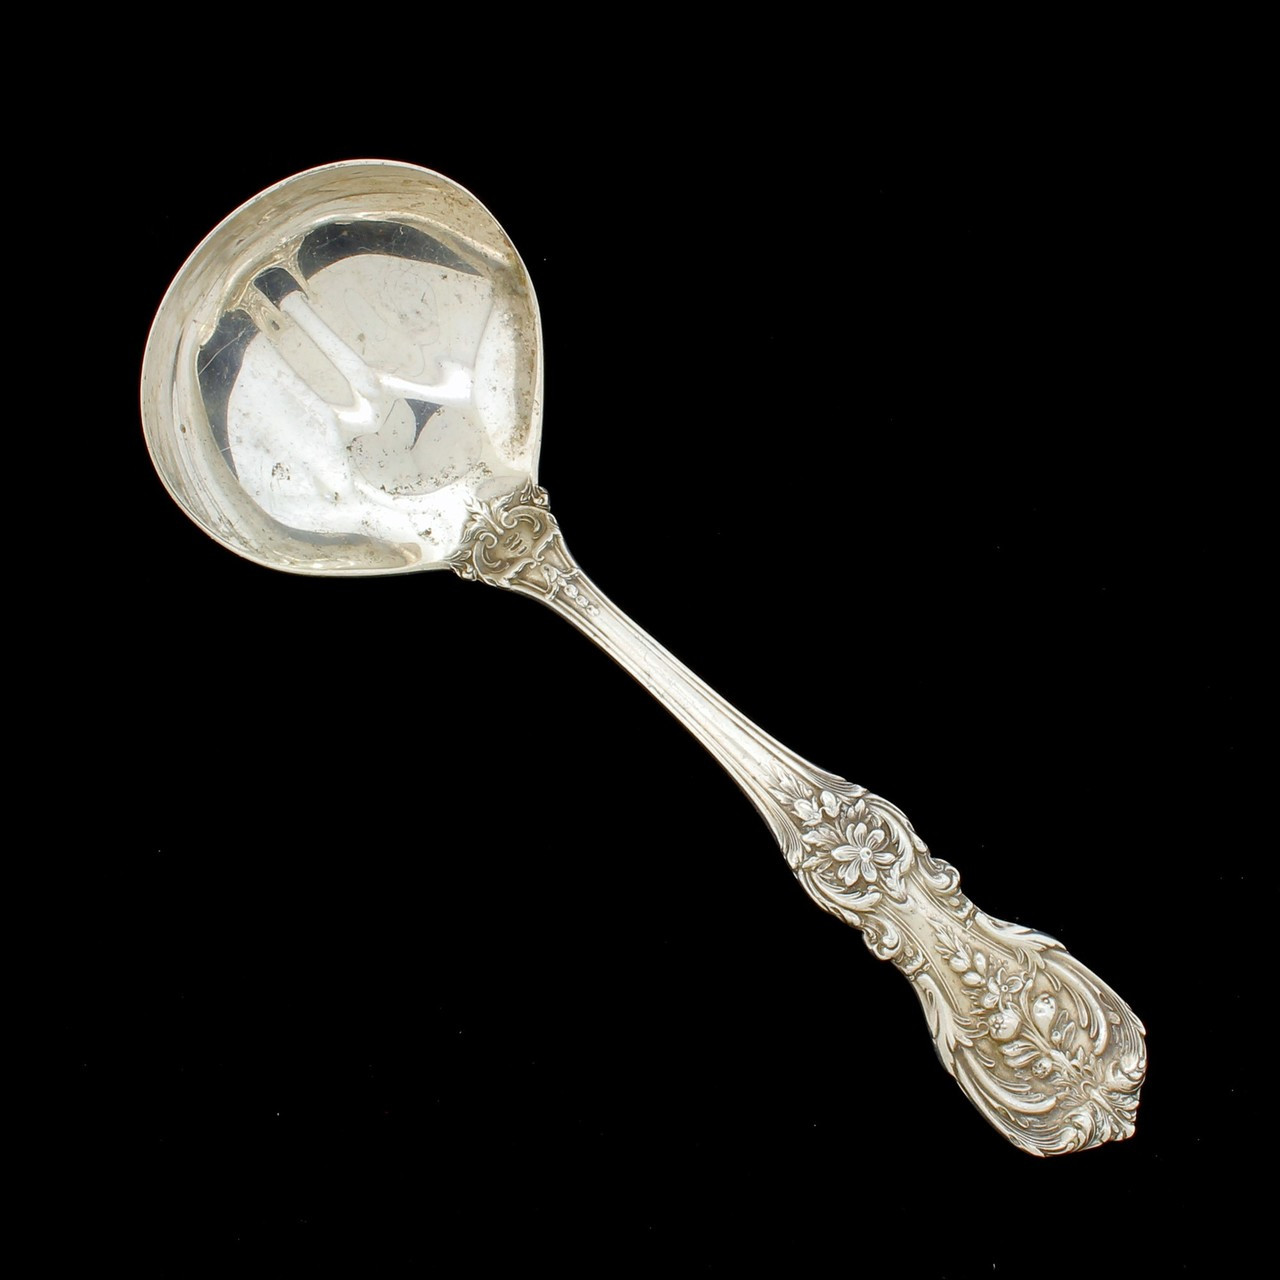 REED & BARTON GEORGIAN ROSE OLD MARK STERLING CREAM SOUP SPOON 5 7/8” XLNT COND 